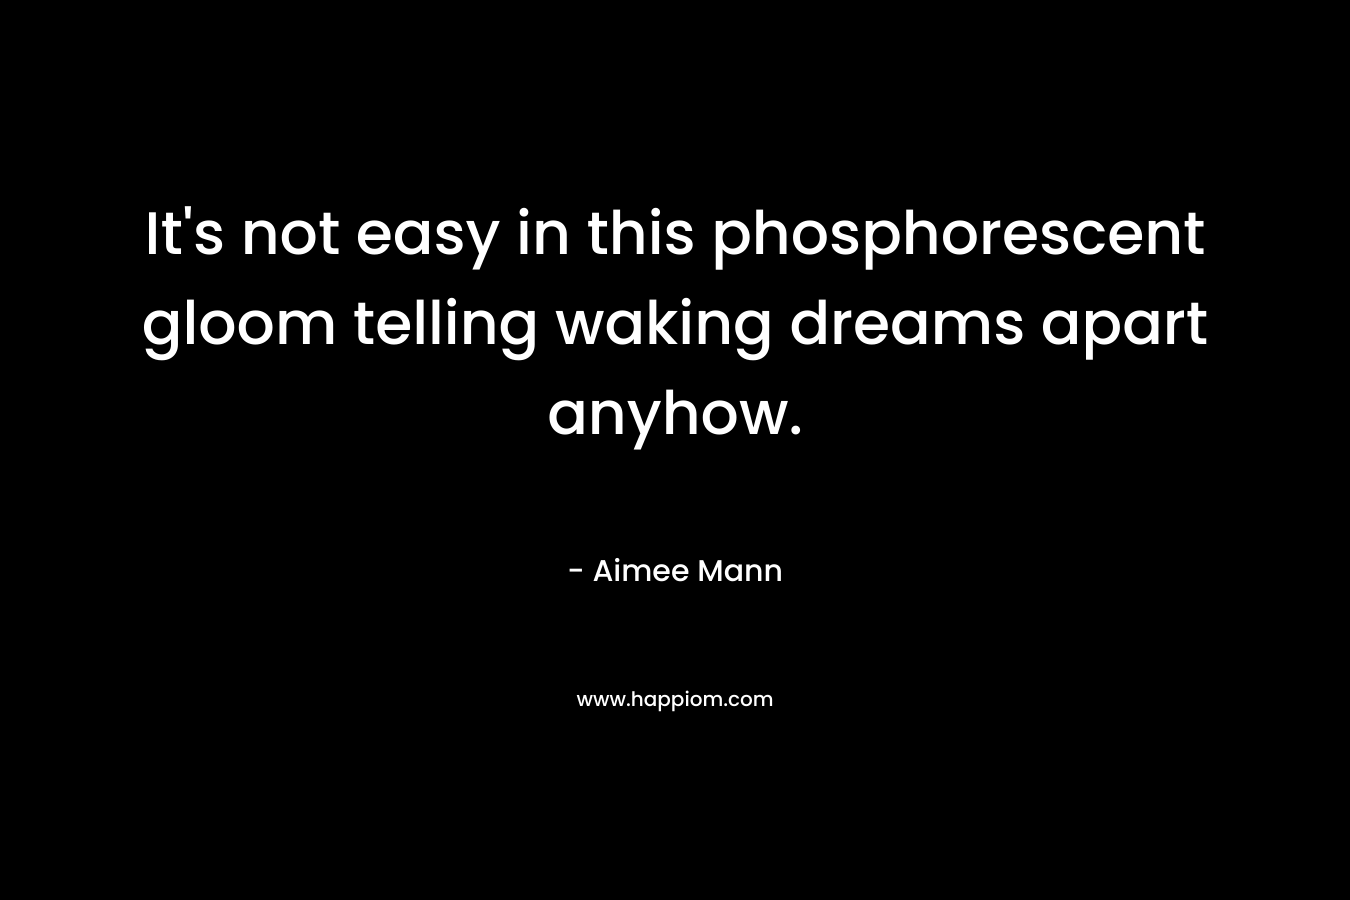 It’s not easy in this phosphorescent gloom telling waking dreams apart anyhow. – Aimee Mann